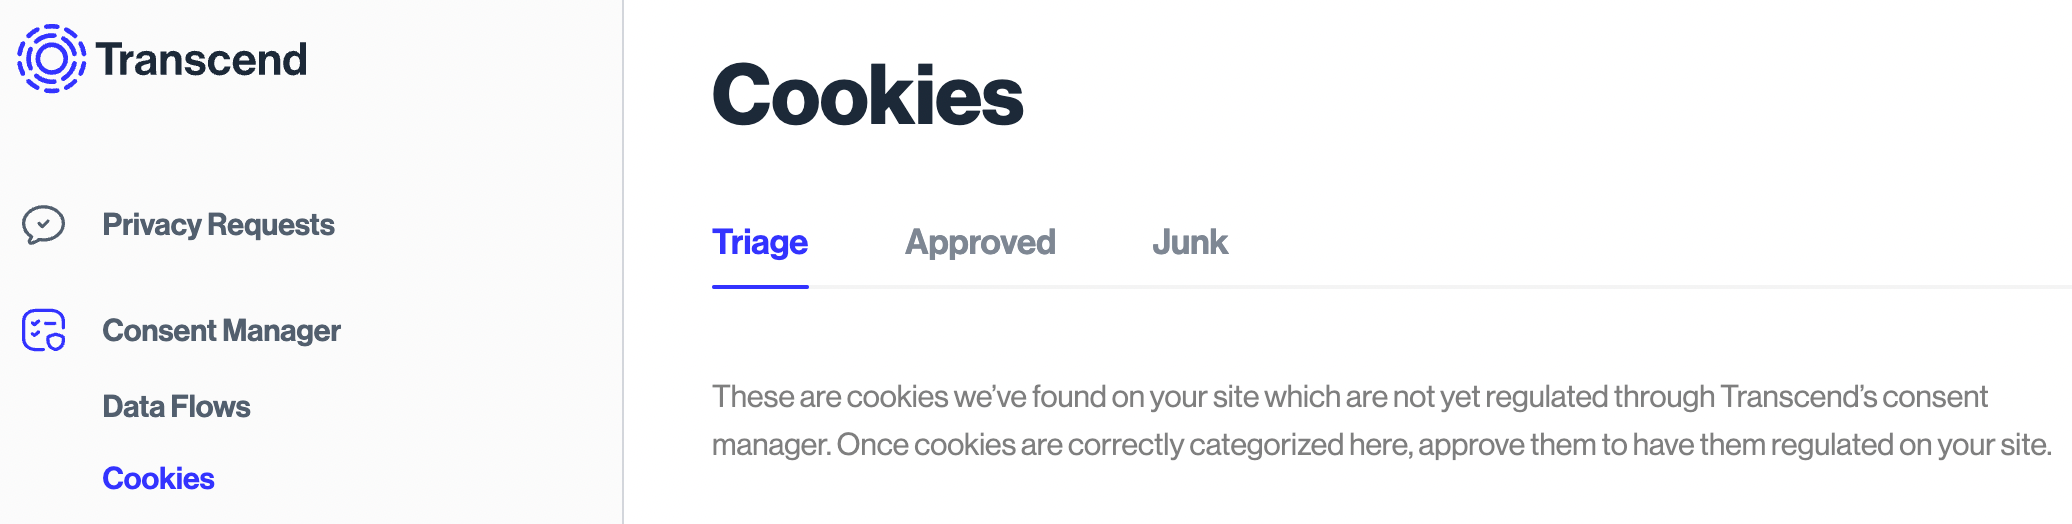 The cookies view in Transcend Consent